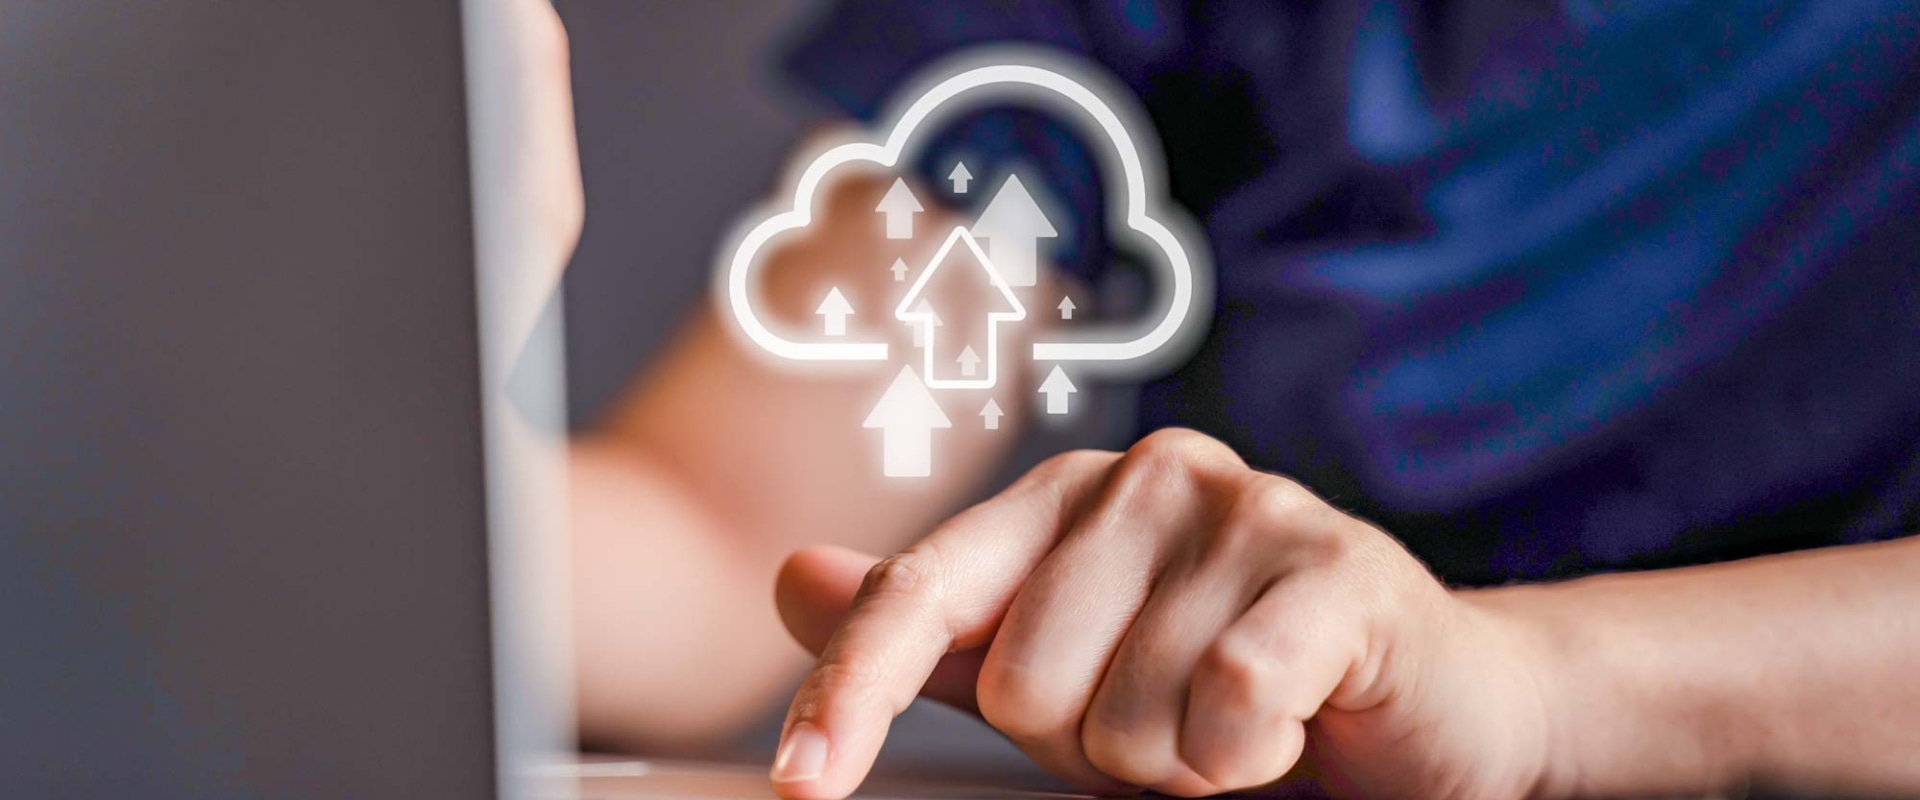 Cloud Storage: The Ultimate Solution for Protecting Your Home or Business